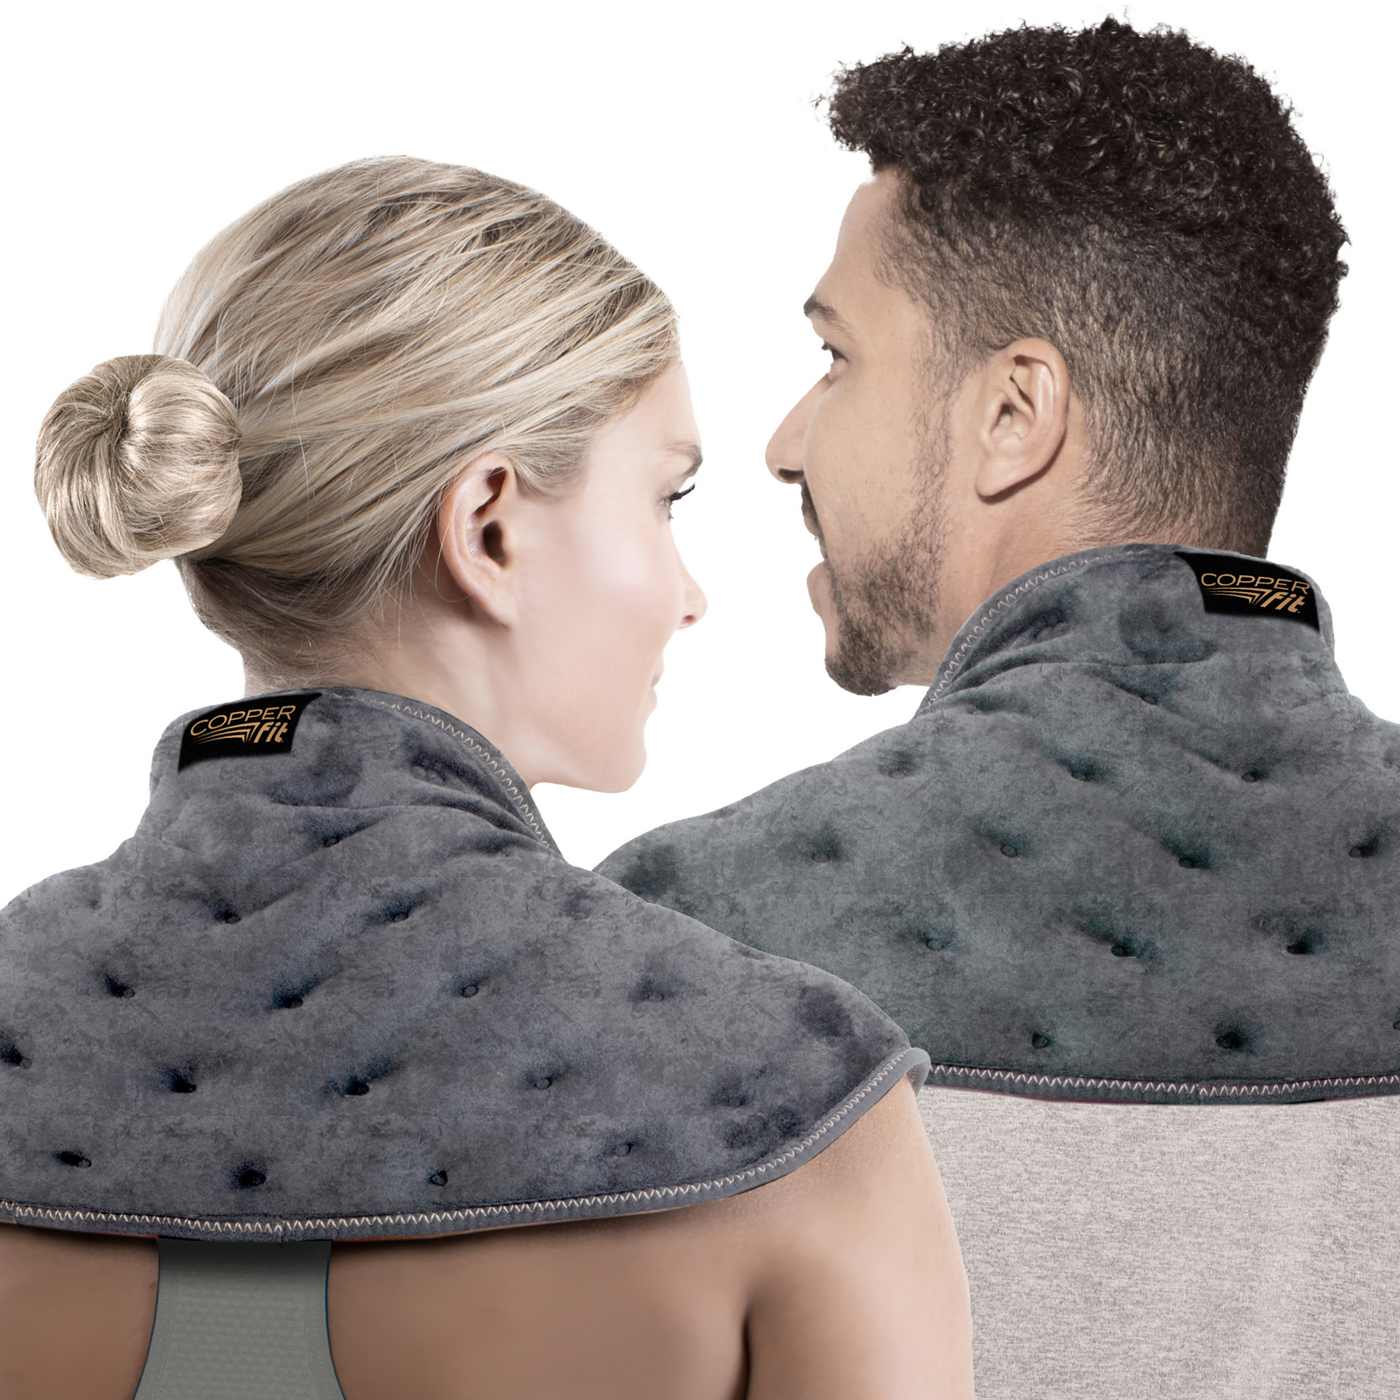 Copper Fit Rapid Relief + Neck & Shoulder Weighted Therapeutic